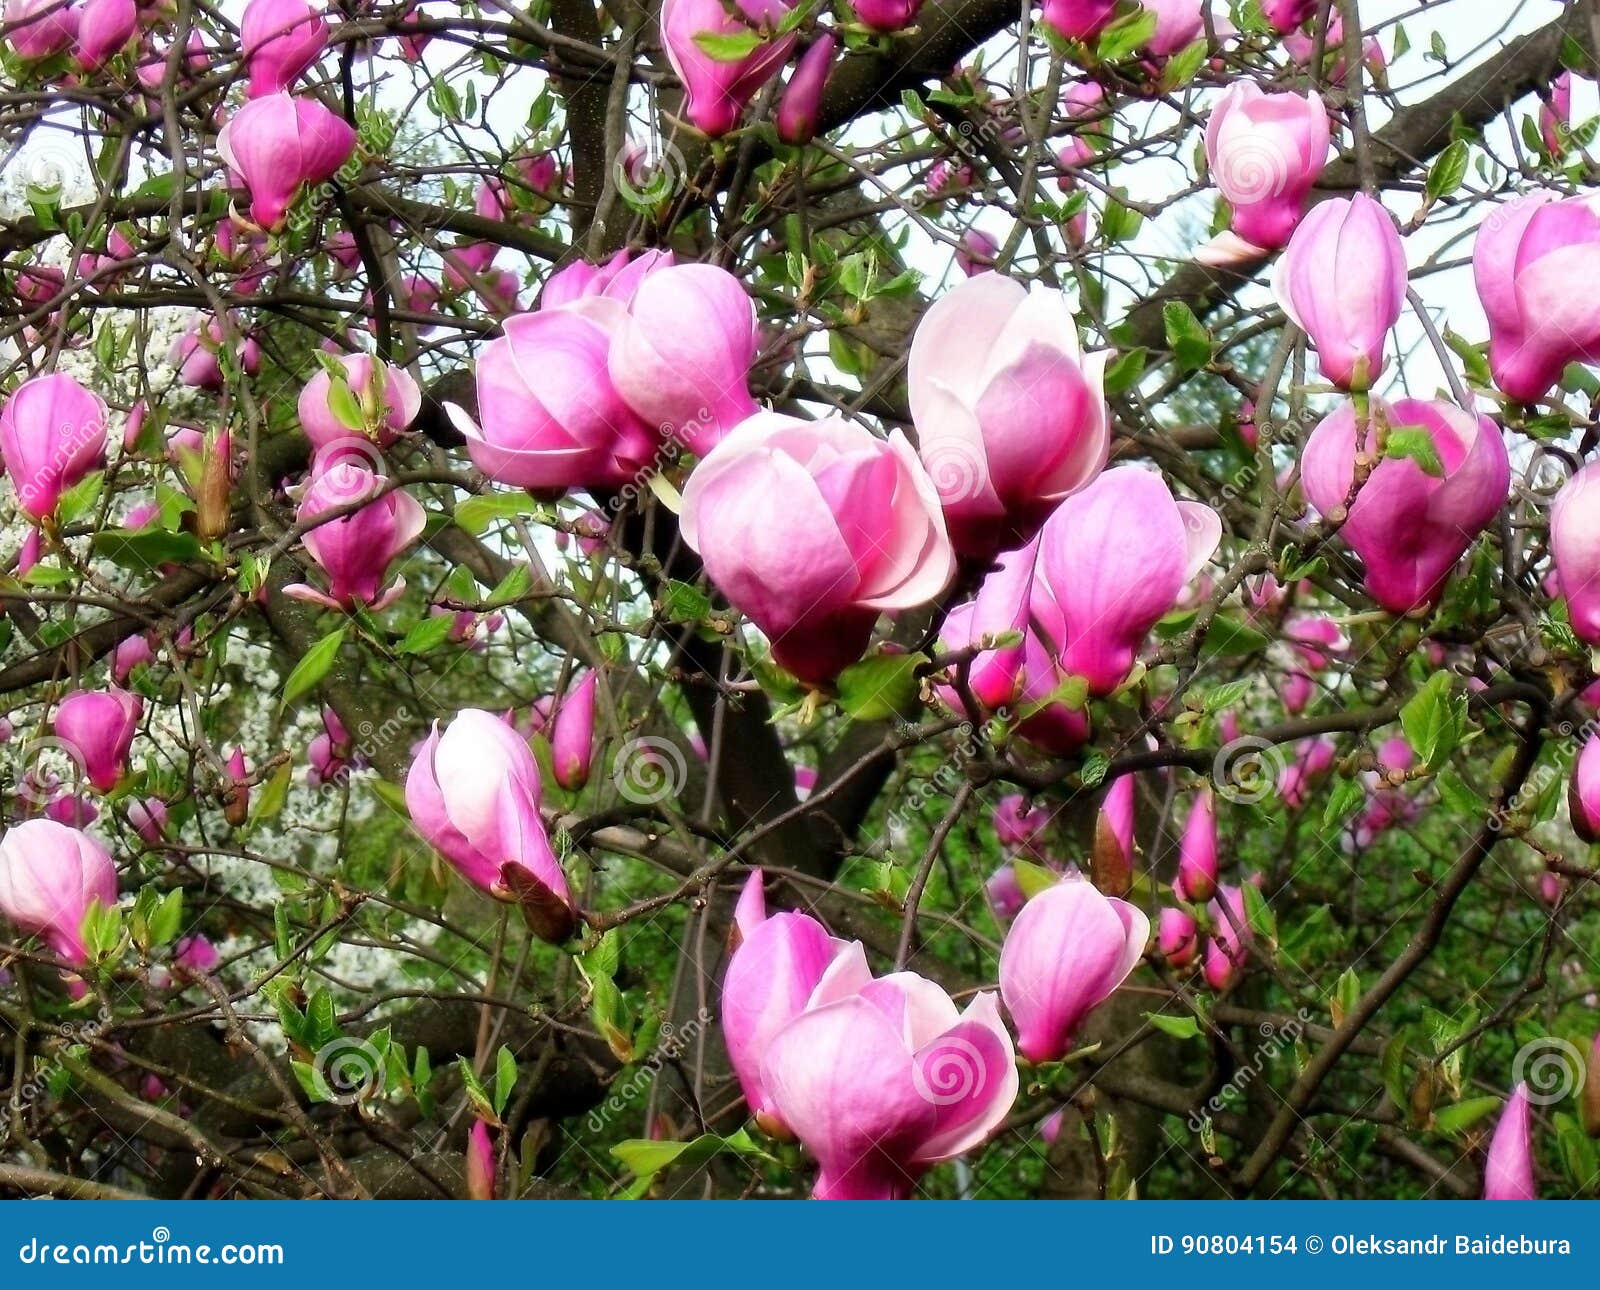 Bloomy Magnolia Tree with Big Pink Flowers Stock Photo - Image of